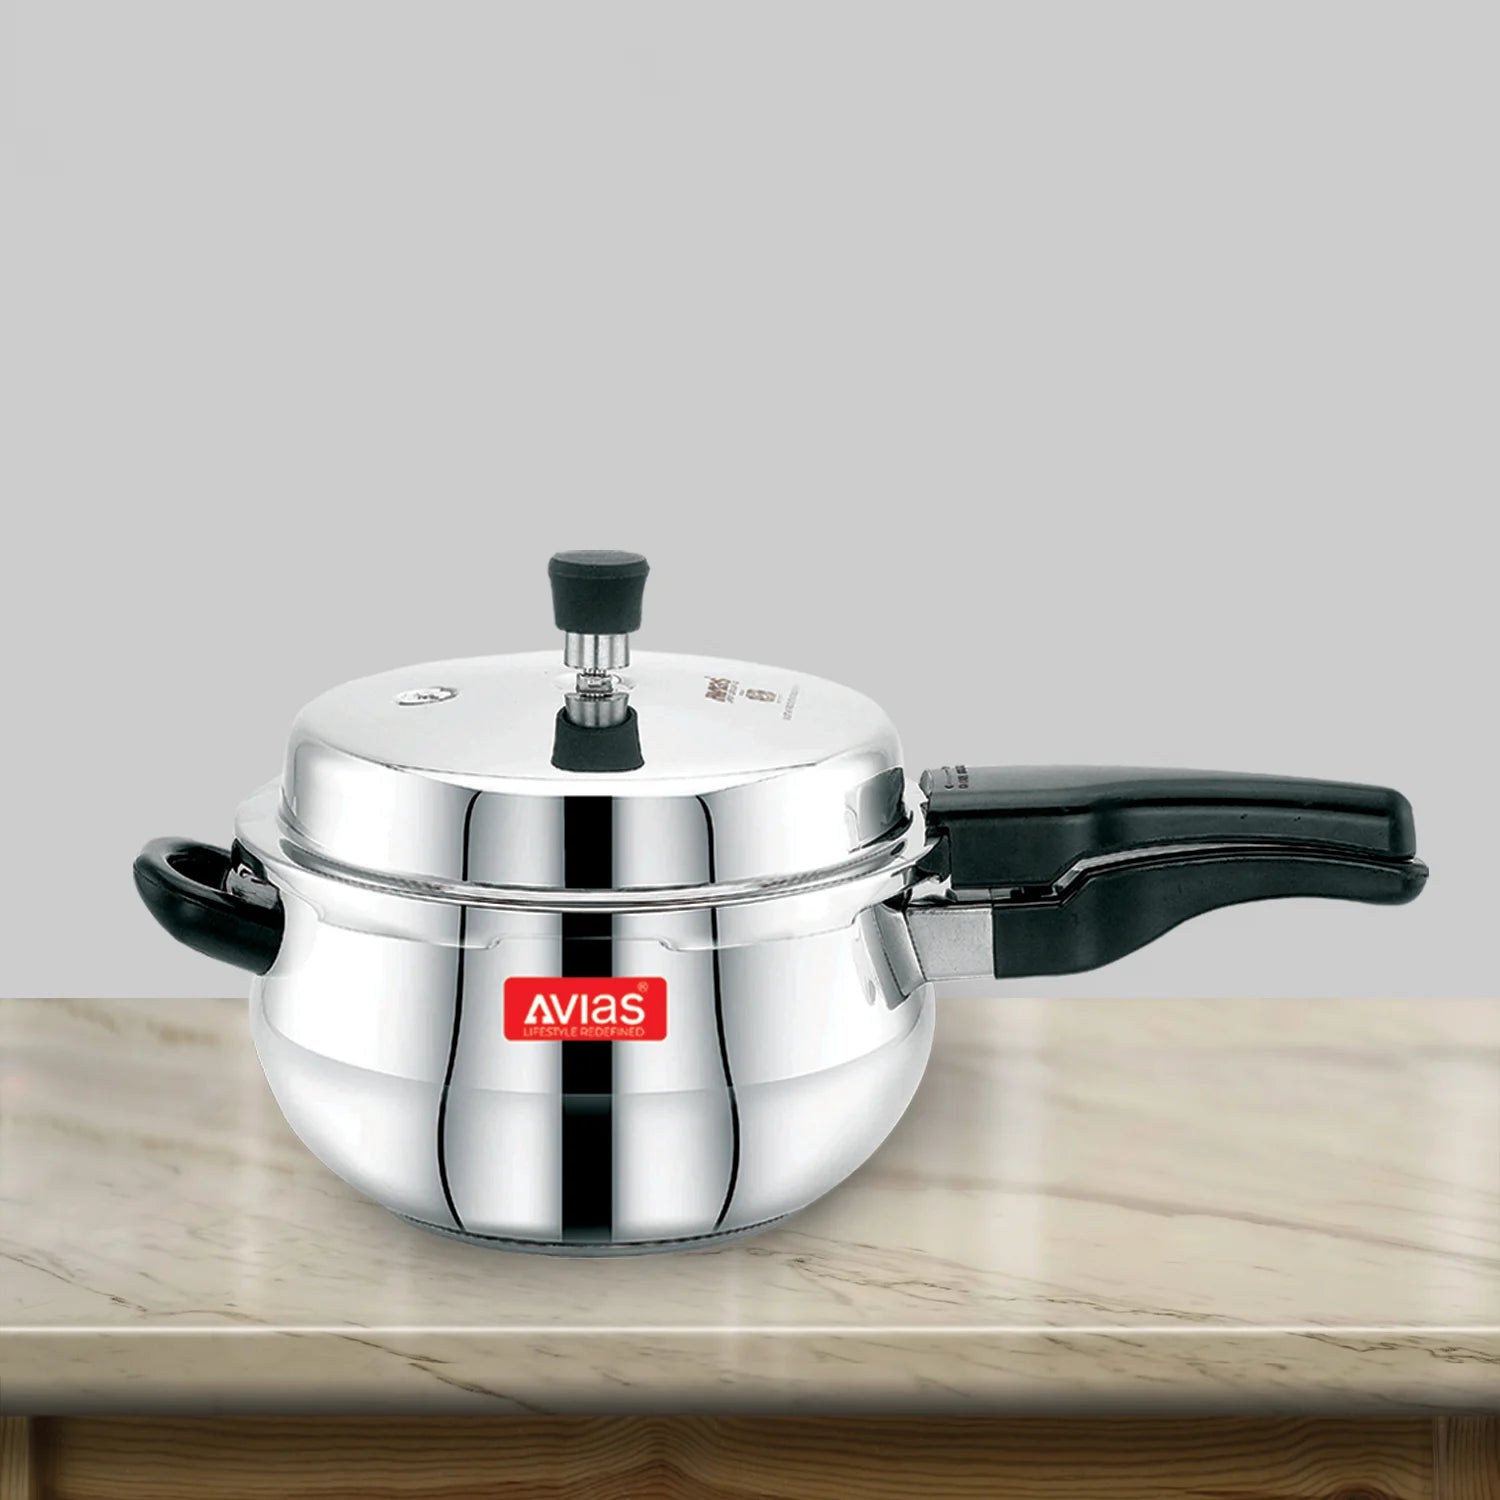 AVIAS Avanti Handi high-quality stainless steel pressure cooker with outer lid